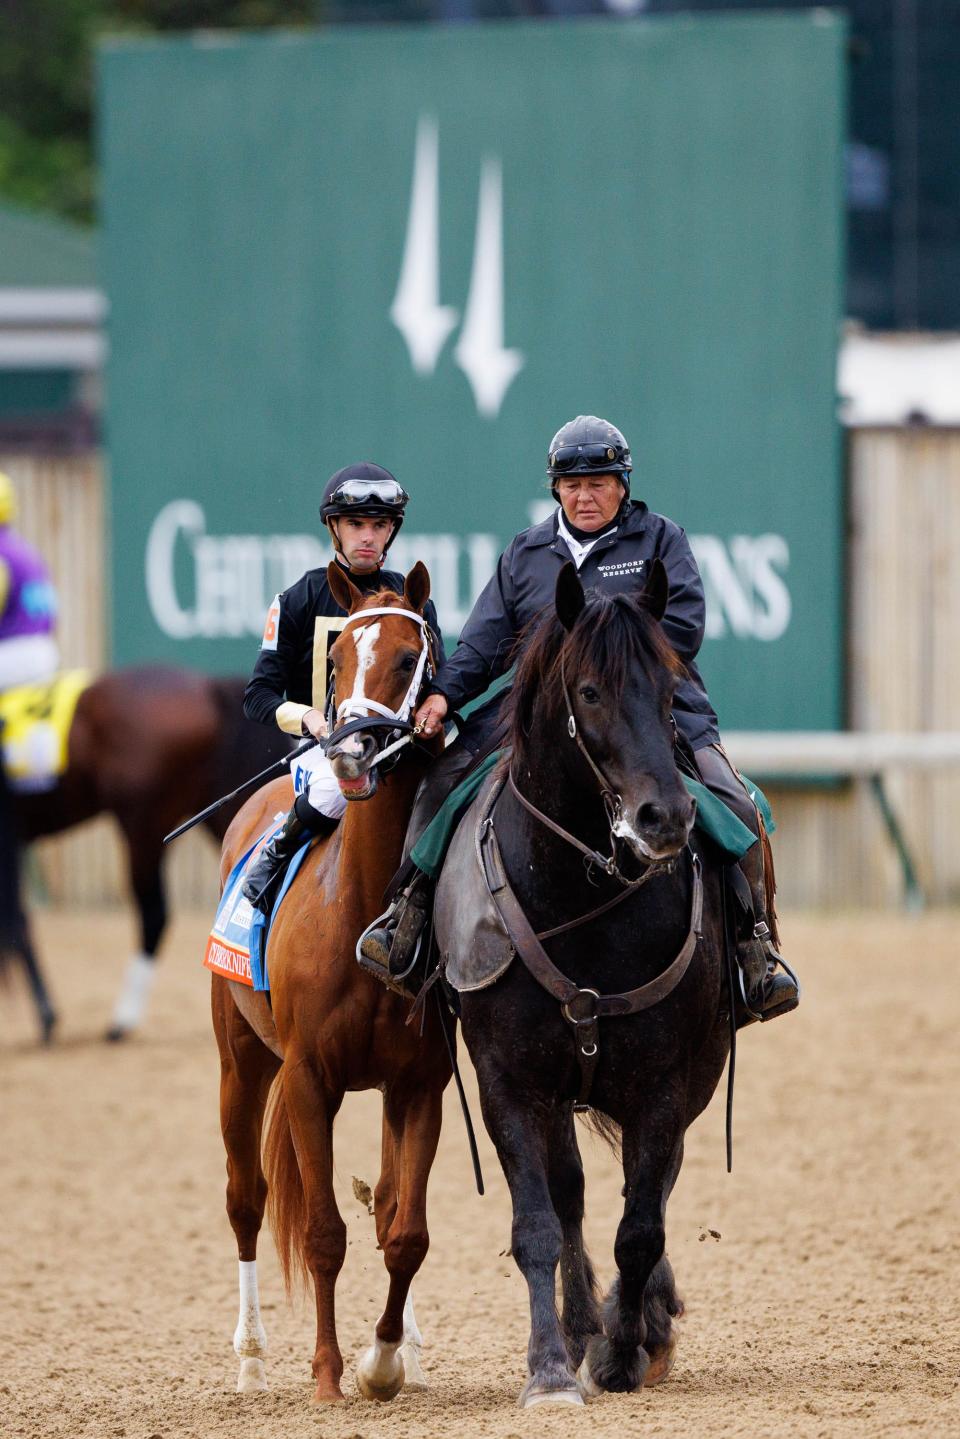 Cyberknife with jockey Florent Geroux up during the post parade during the 148th Kentucky Derby on Saturday, May 7, 2022, at Churchill Downs in Louisville, Kentucky.